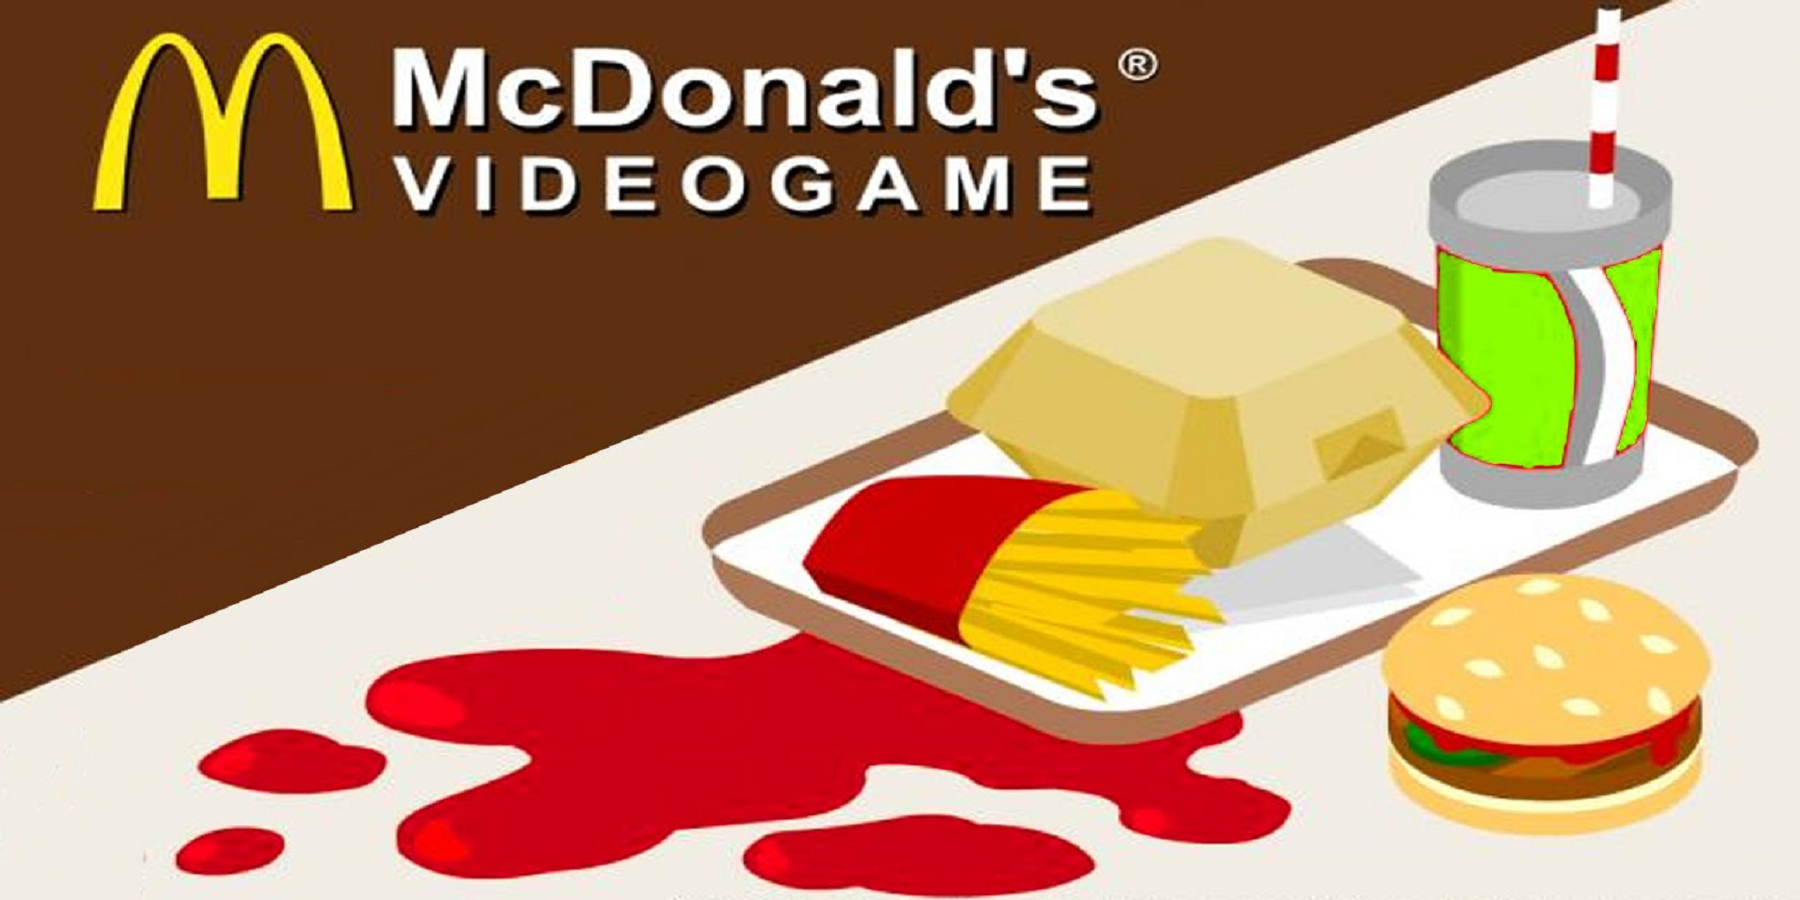 McDonald's Using Video Game to Recruit Potential Employees